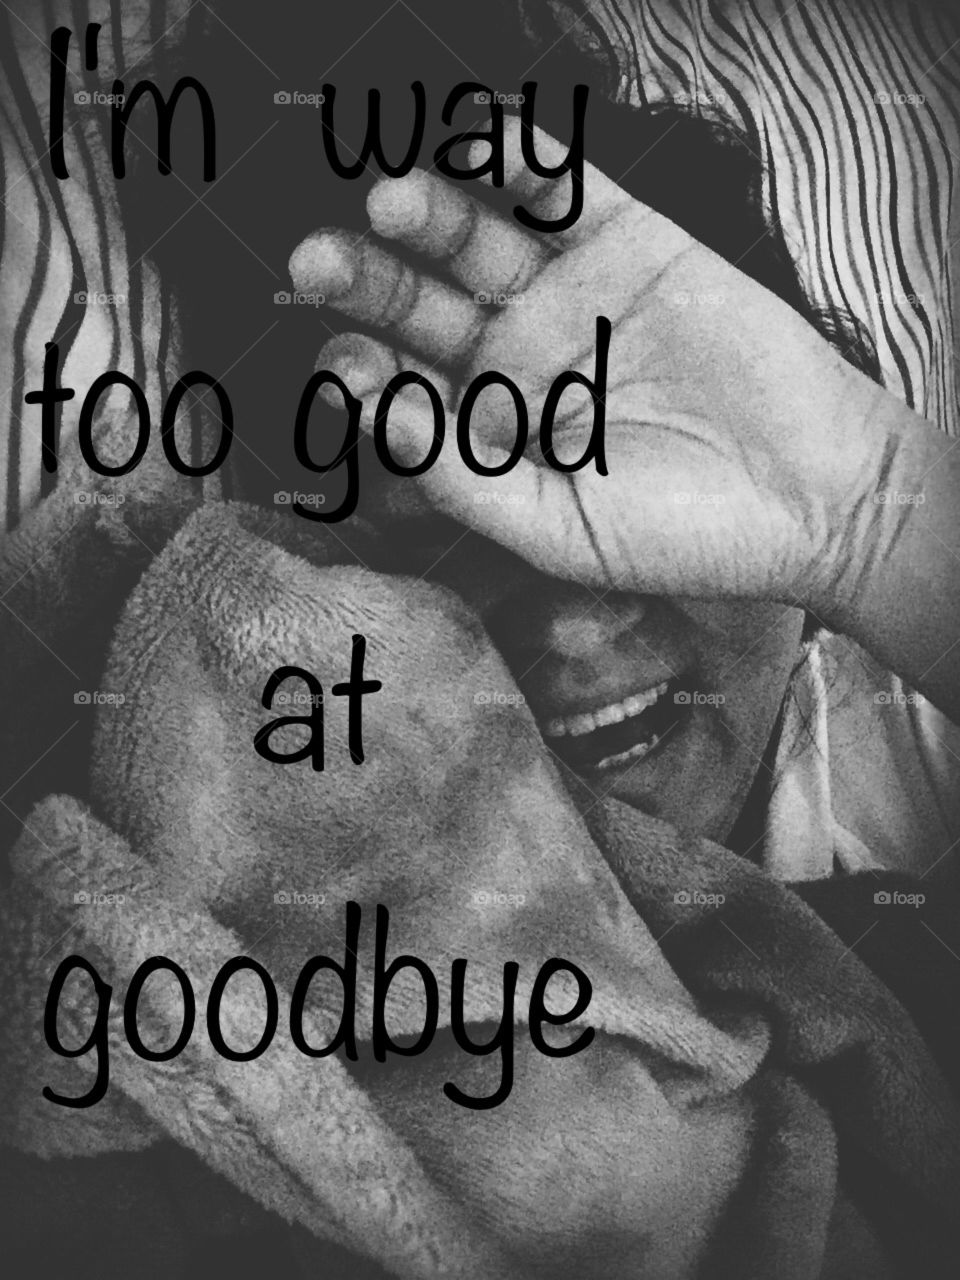 Goodbye is the hardest thing to say!